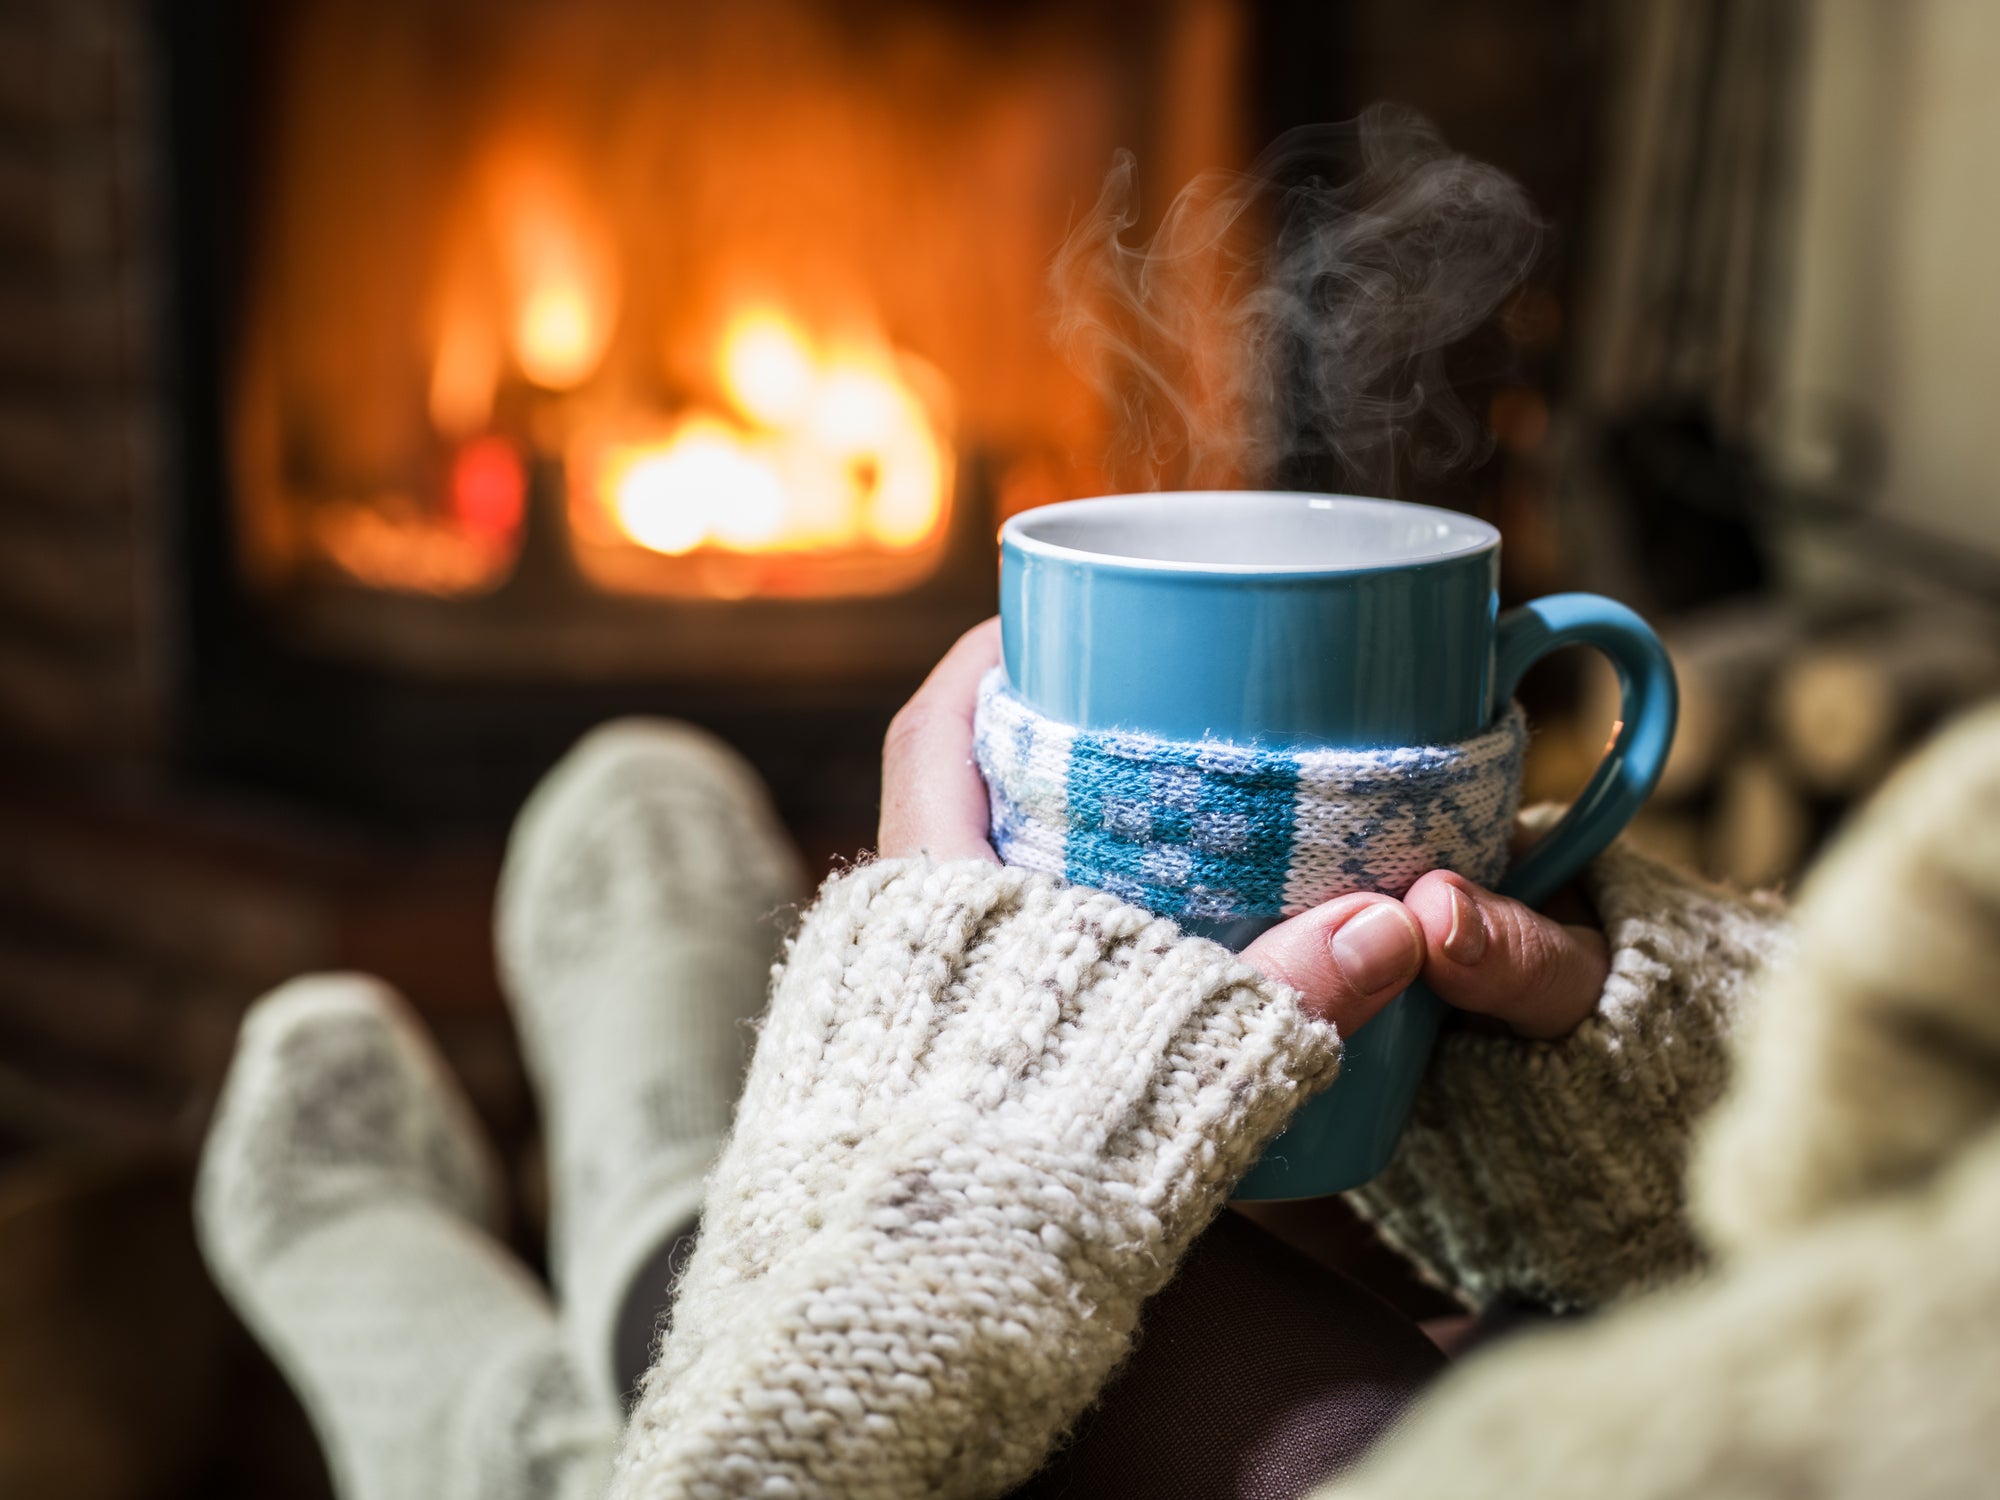 a pair of hands is holding a hot coffee mug near a cozy fireplace